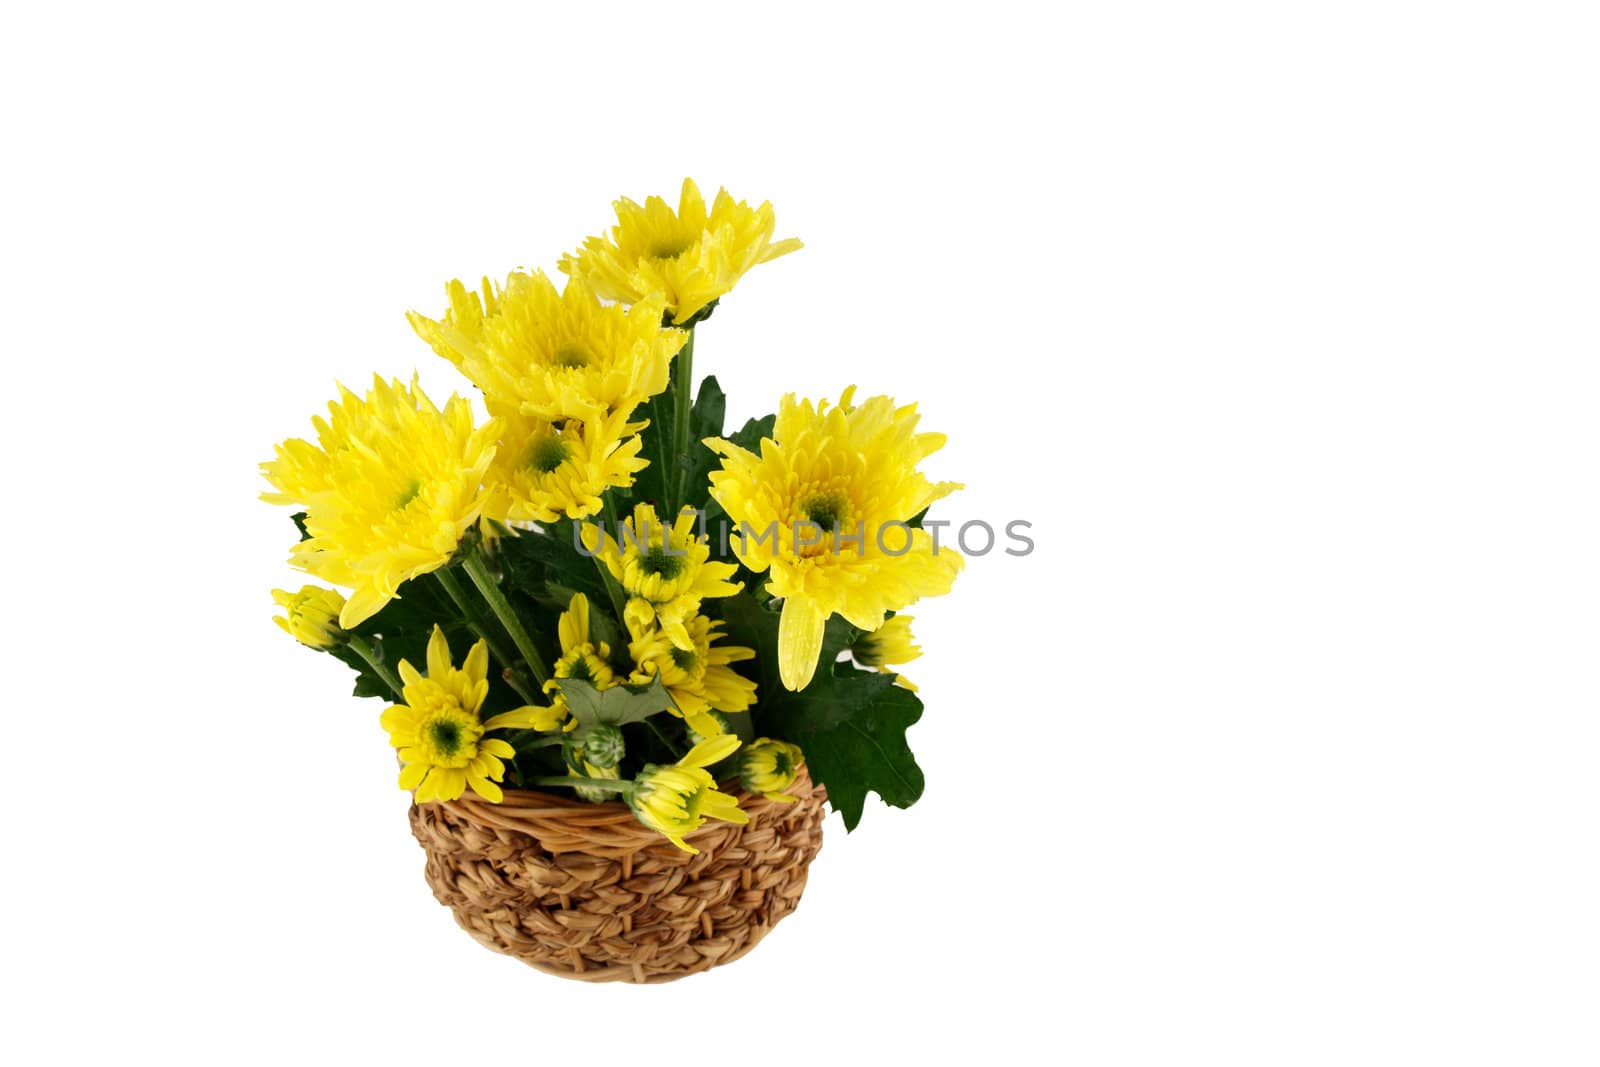 Yellow flower on the basket by jakgree